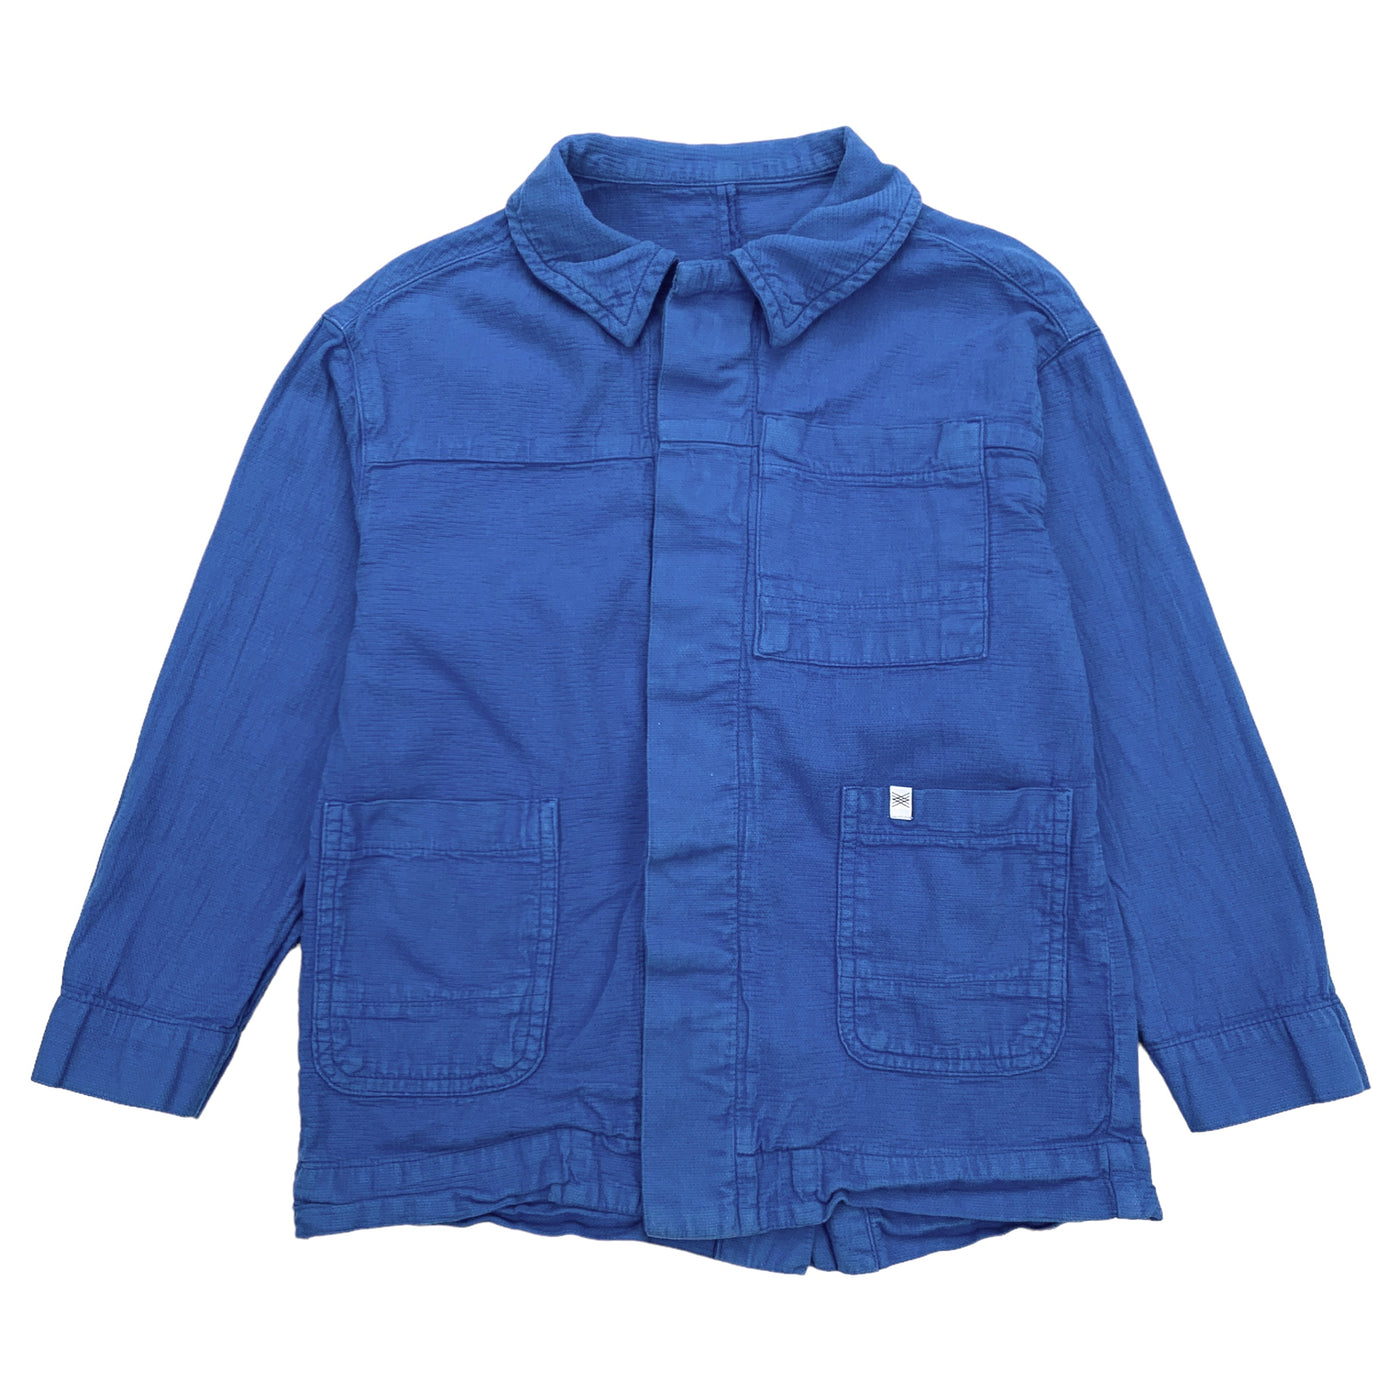 Repose AMS worker jacket blue size 4